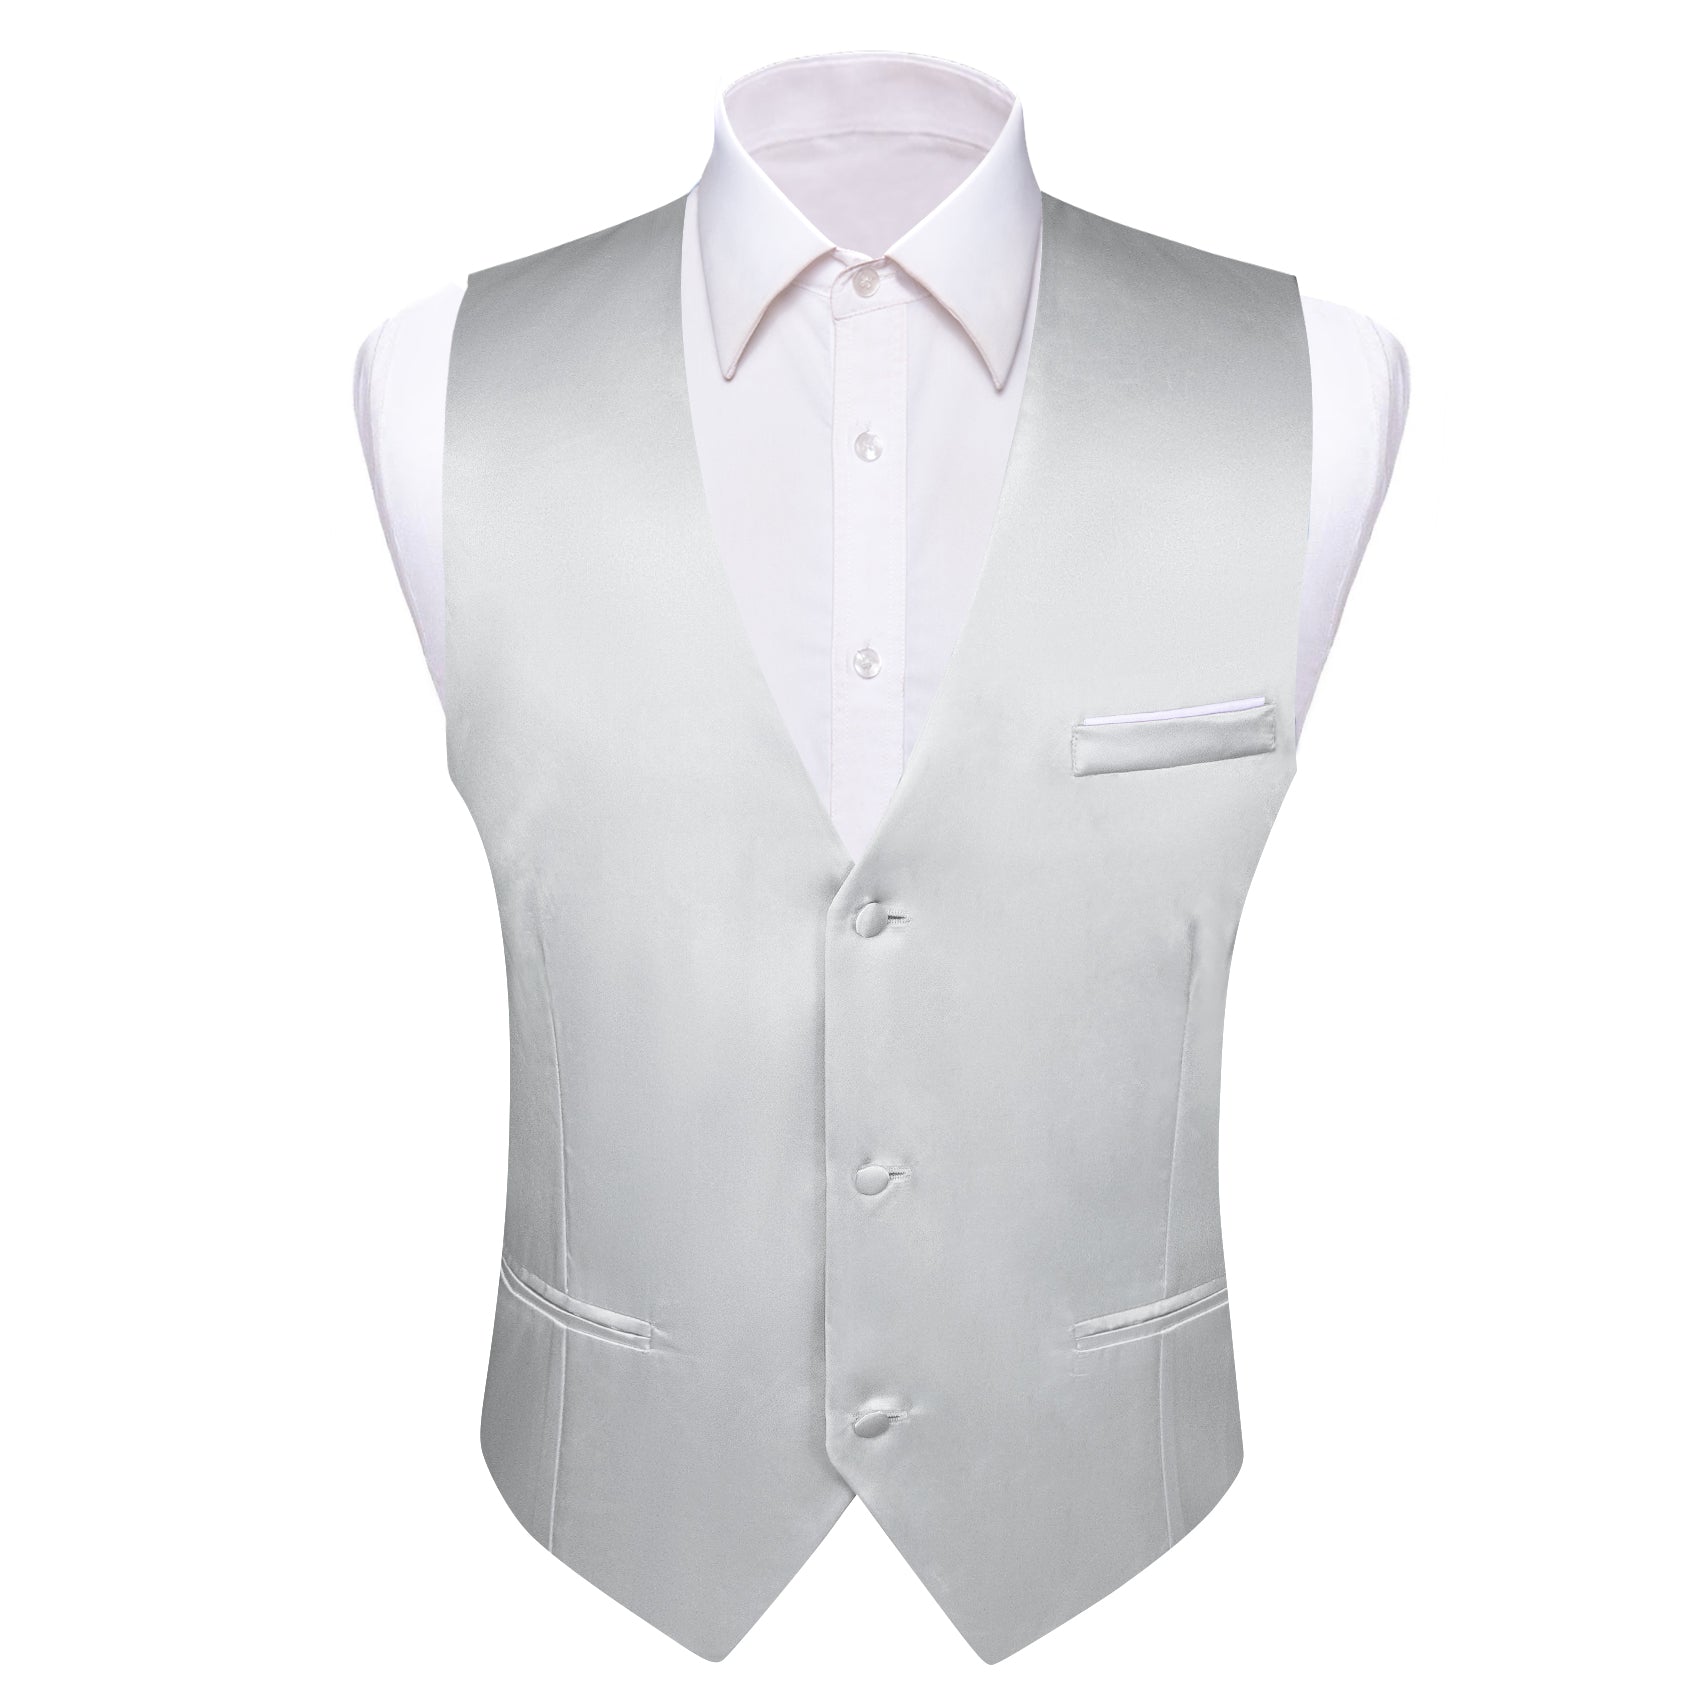 White Solid Silk Waistcoat Vest for Party